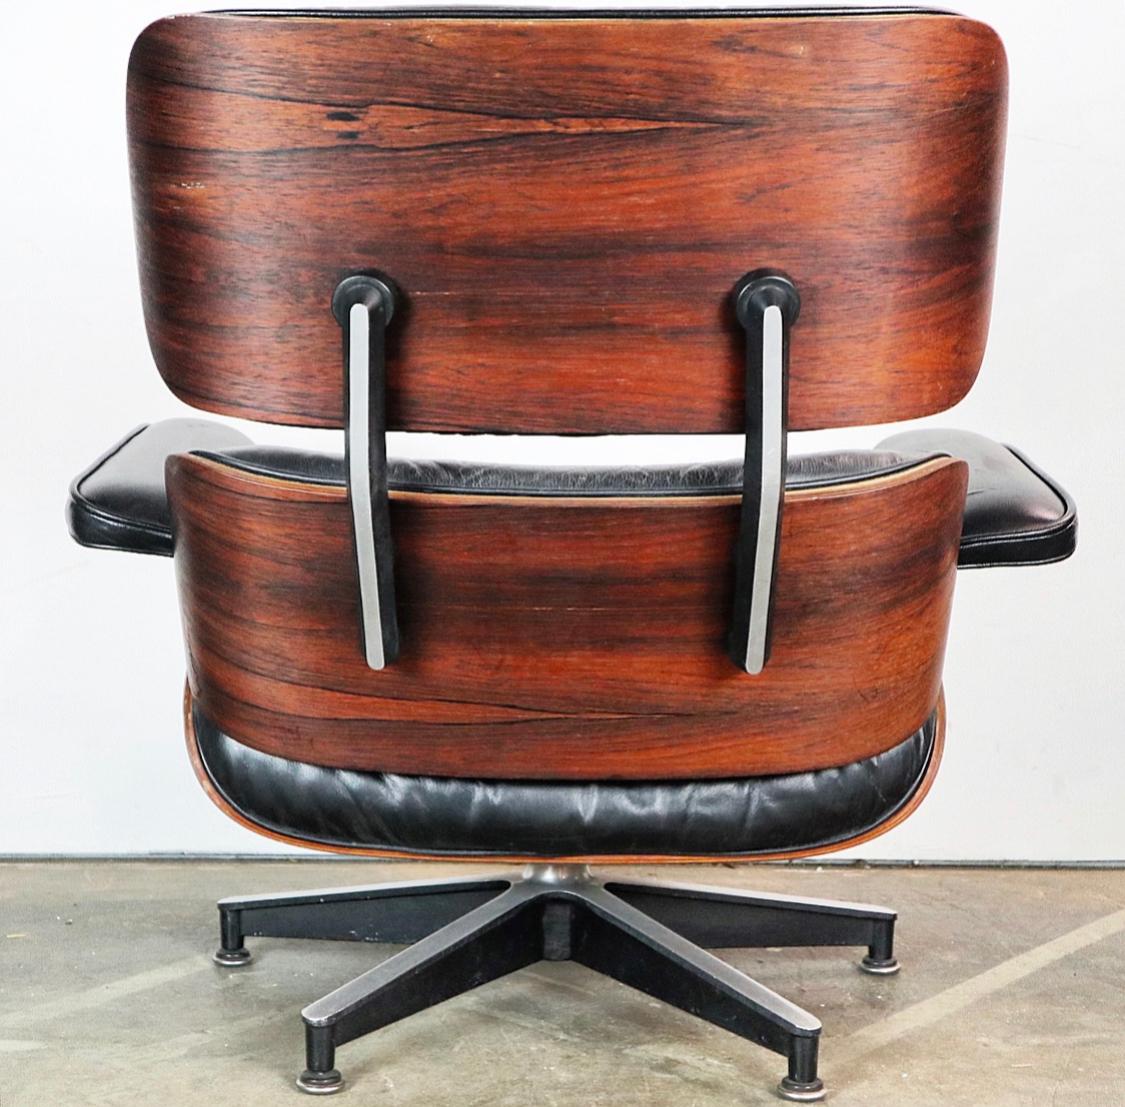 Stunning rosewood shells adorn this Classic Herman Miller Eames lounge chair and ottoman. Comfortable foam cushions allow for both working and napping. Cushions repainted even black. Signed and guaranteed authentic. Original chair and ottoman set.